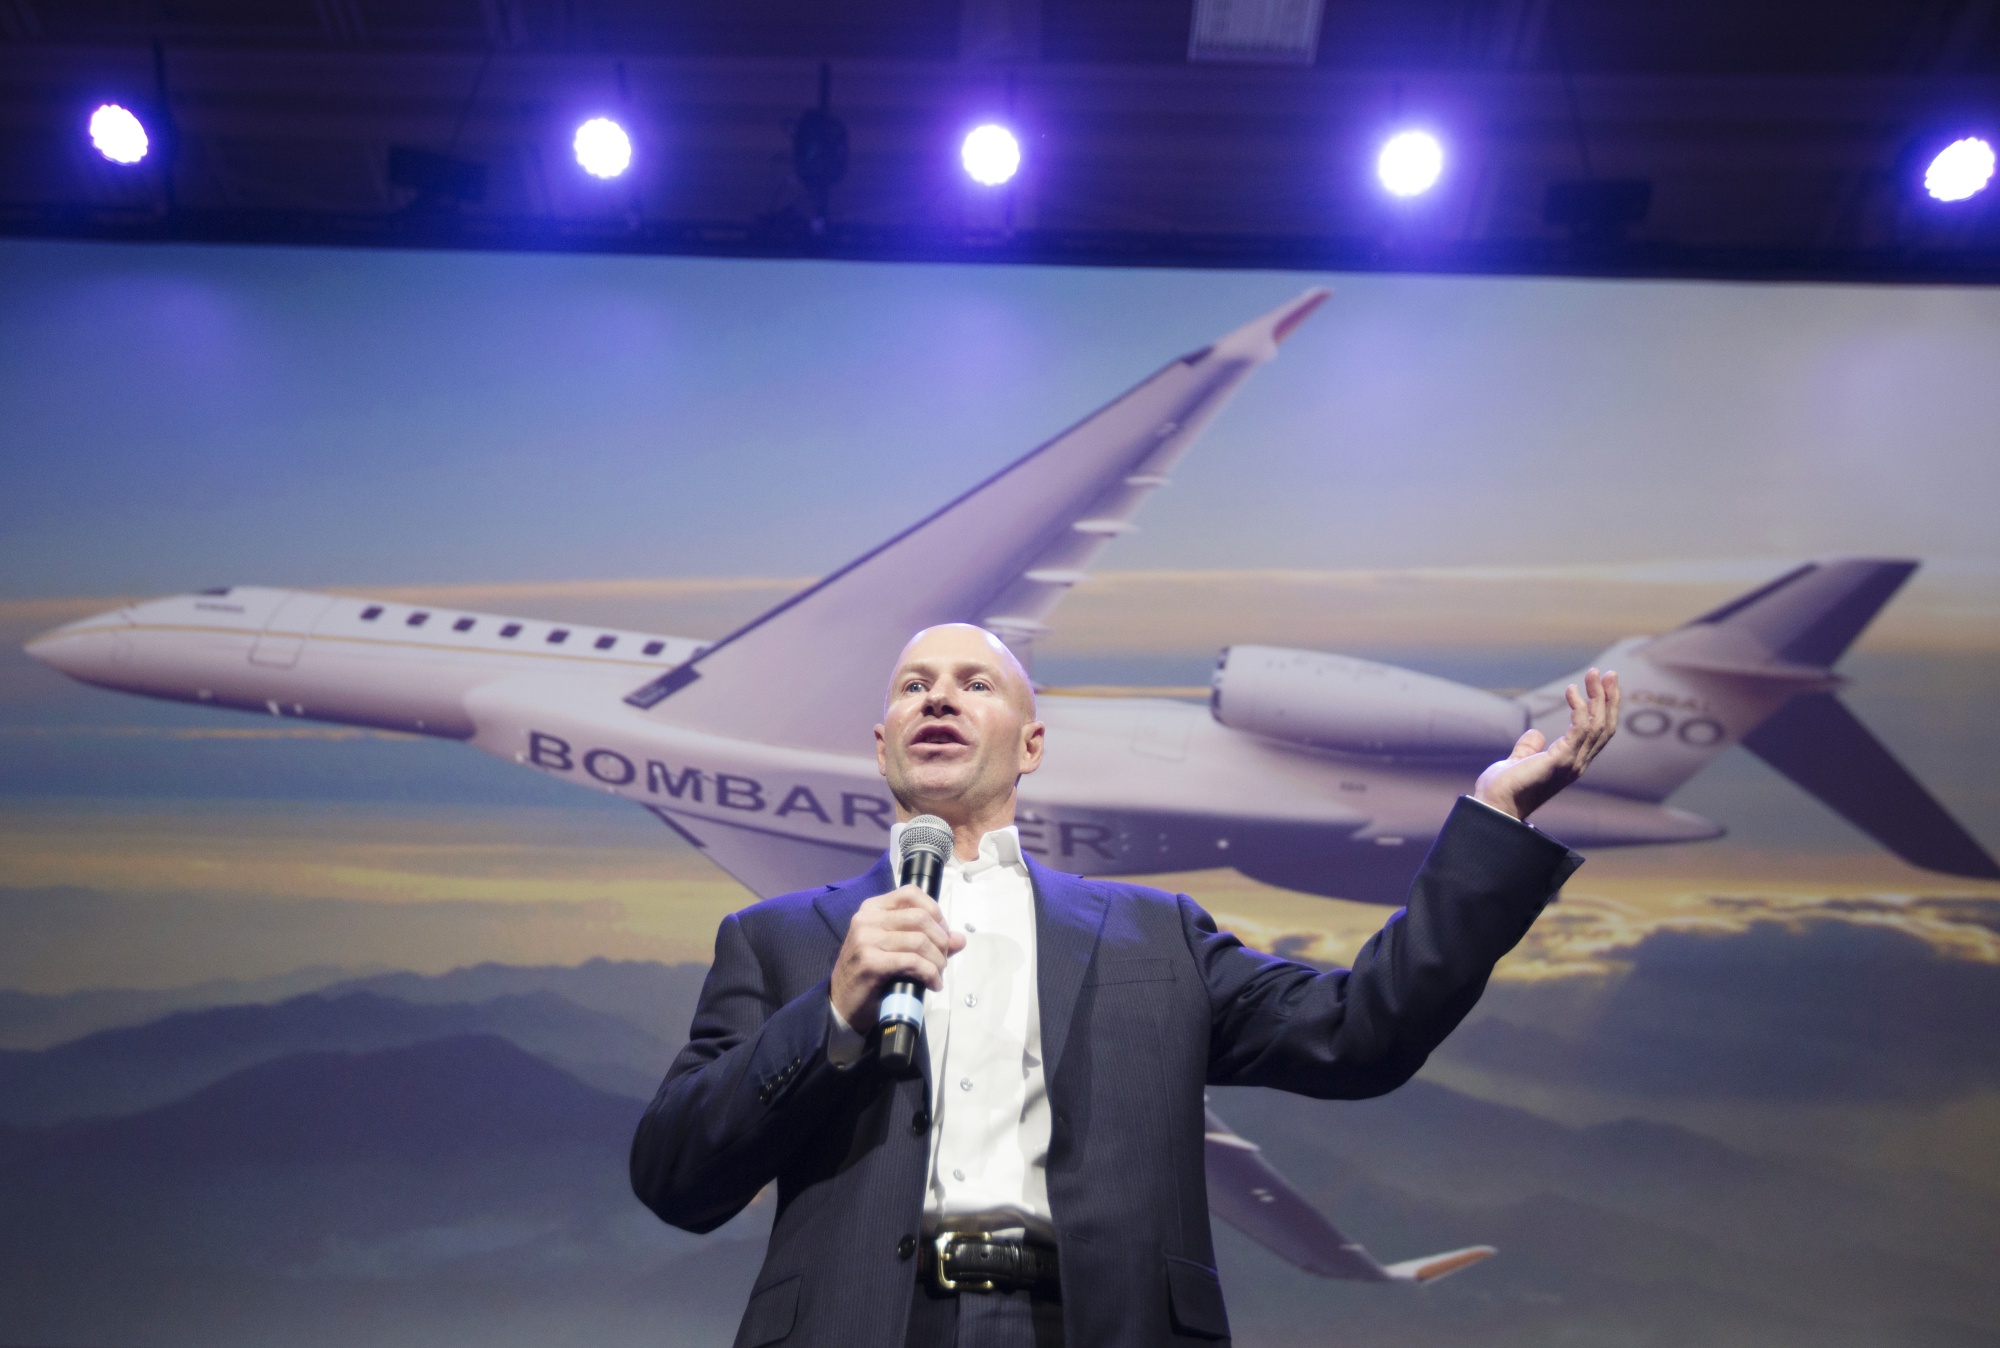 Alain Bellemare, president and chief executive officer of Bombardier Inc., speaks during a Global 7500 luxury jet launch event in Montreal.